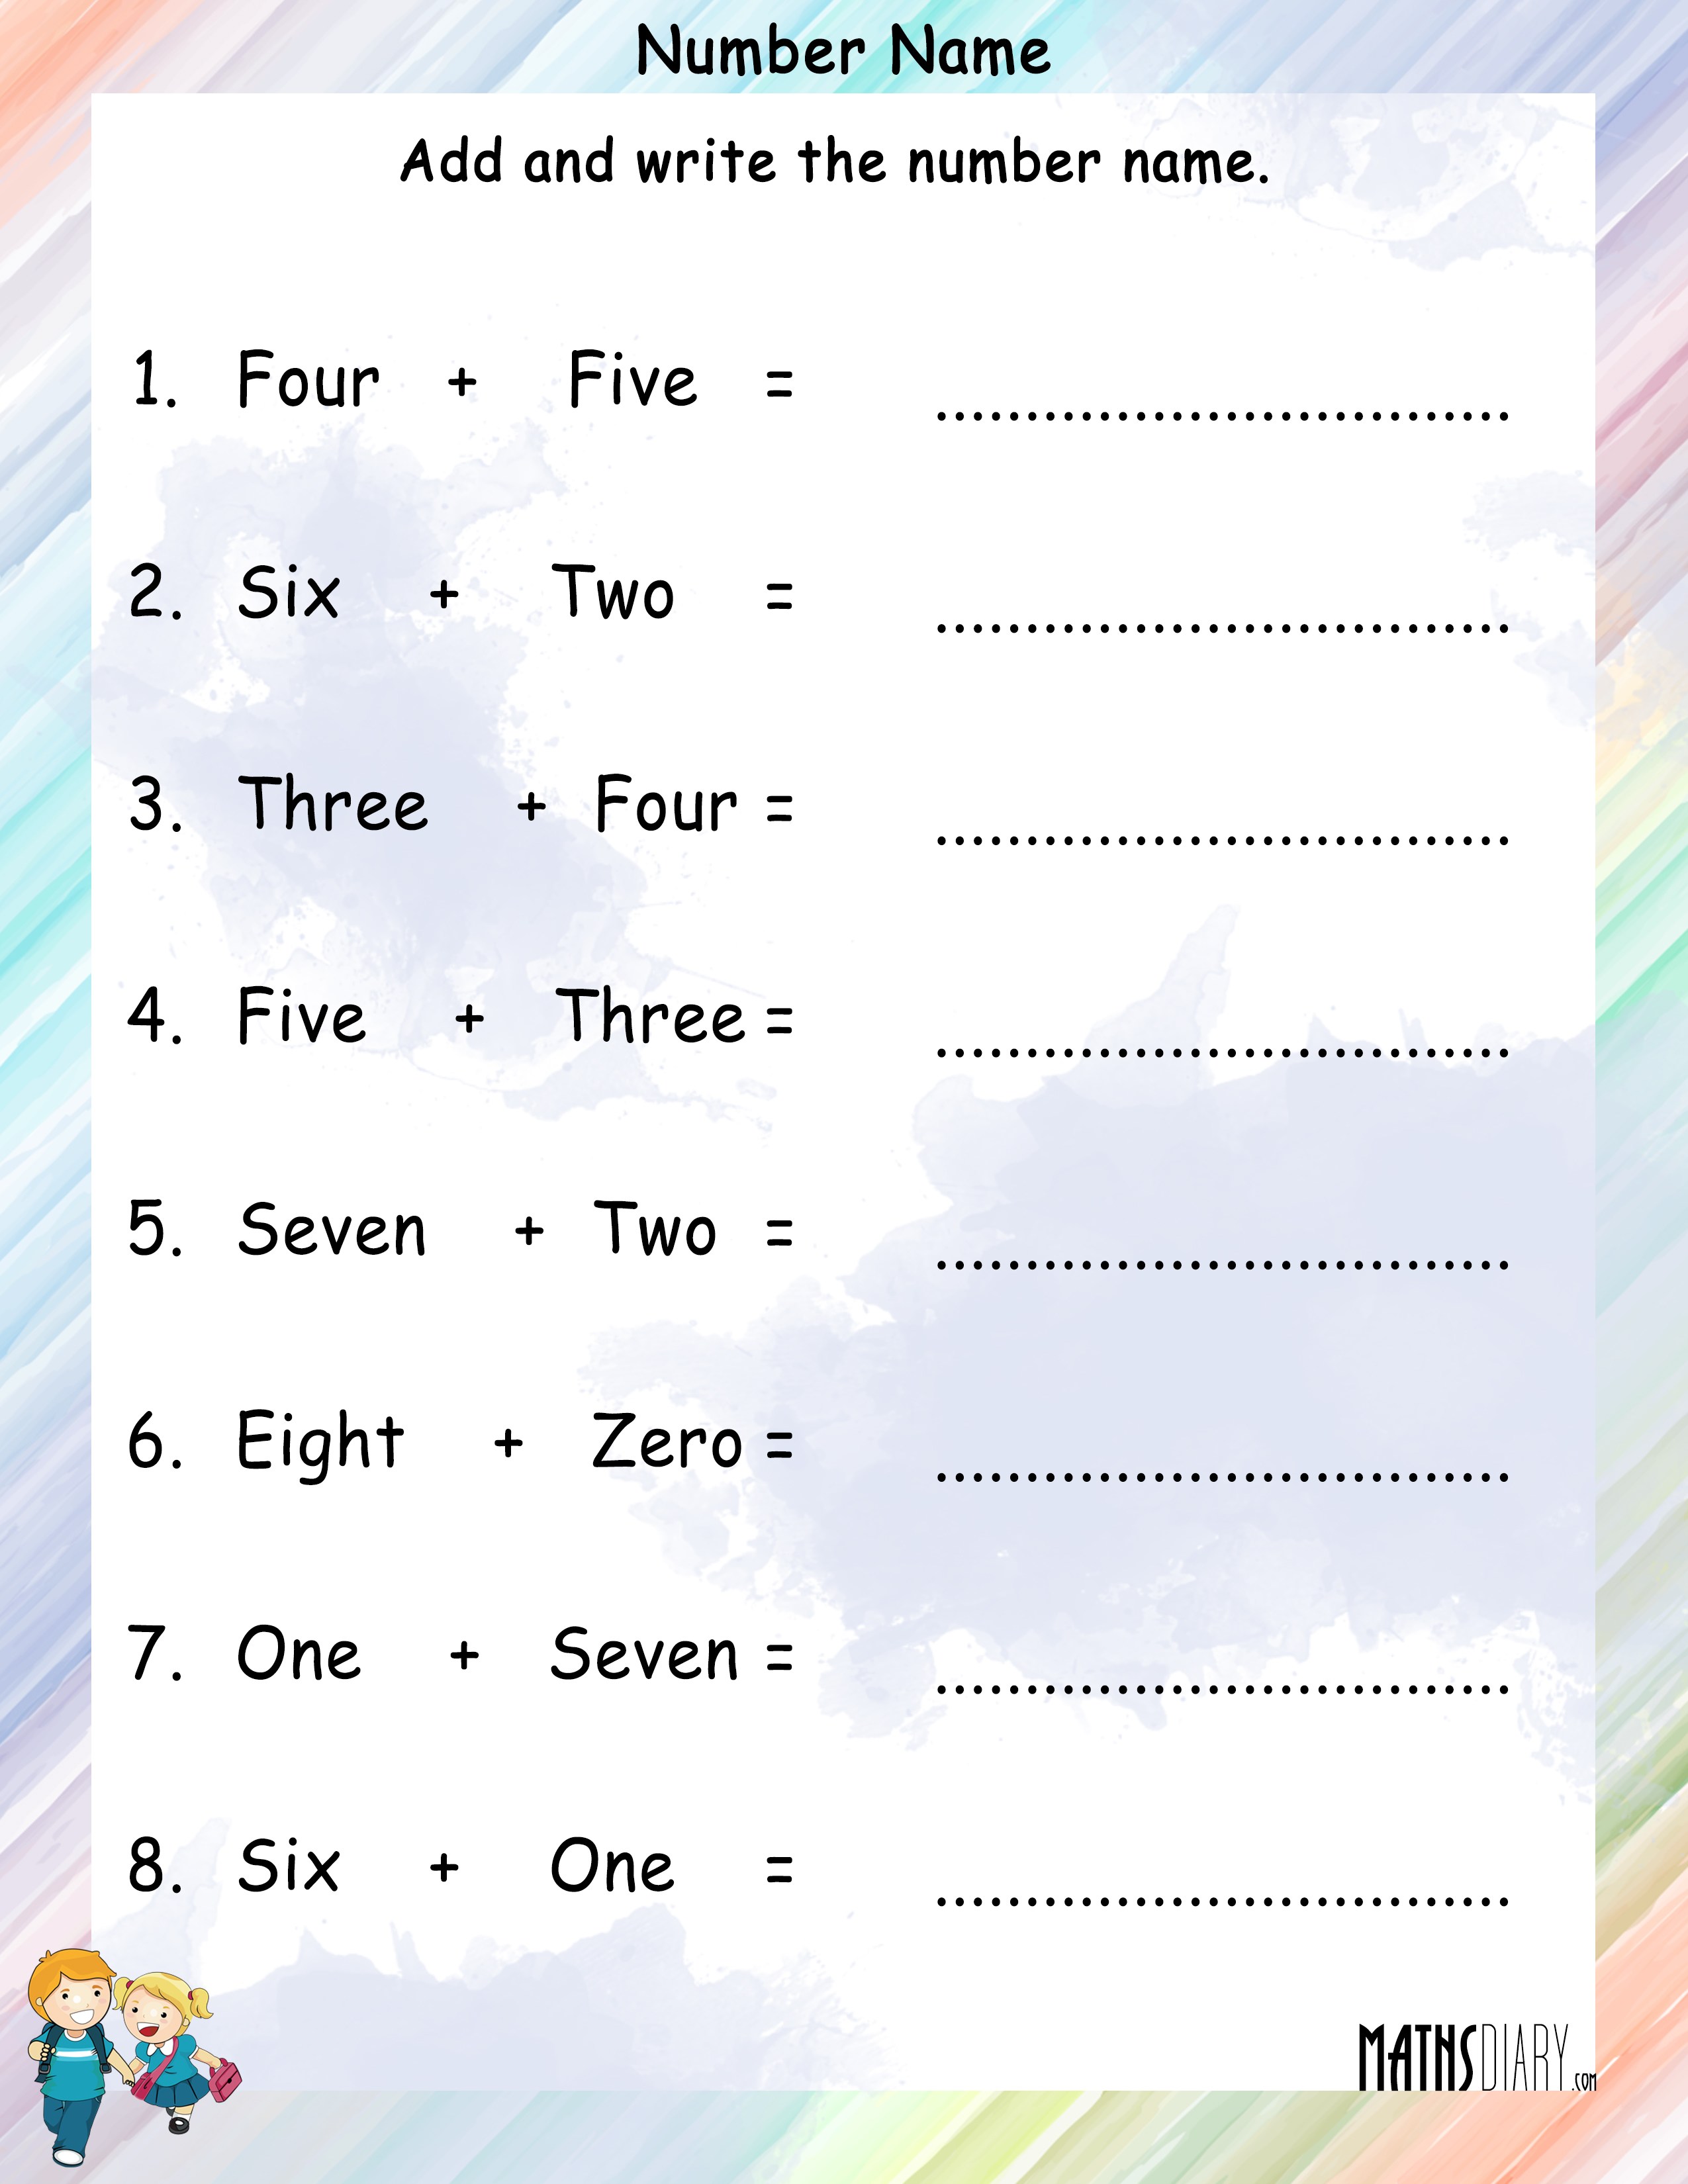 add-the-number-names-and-write-answer-in-number-name-math-worksheets-mathsdiary